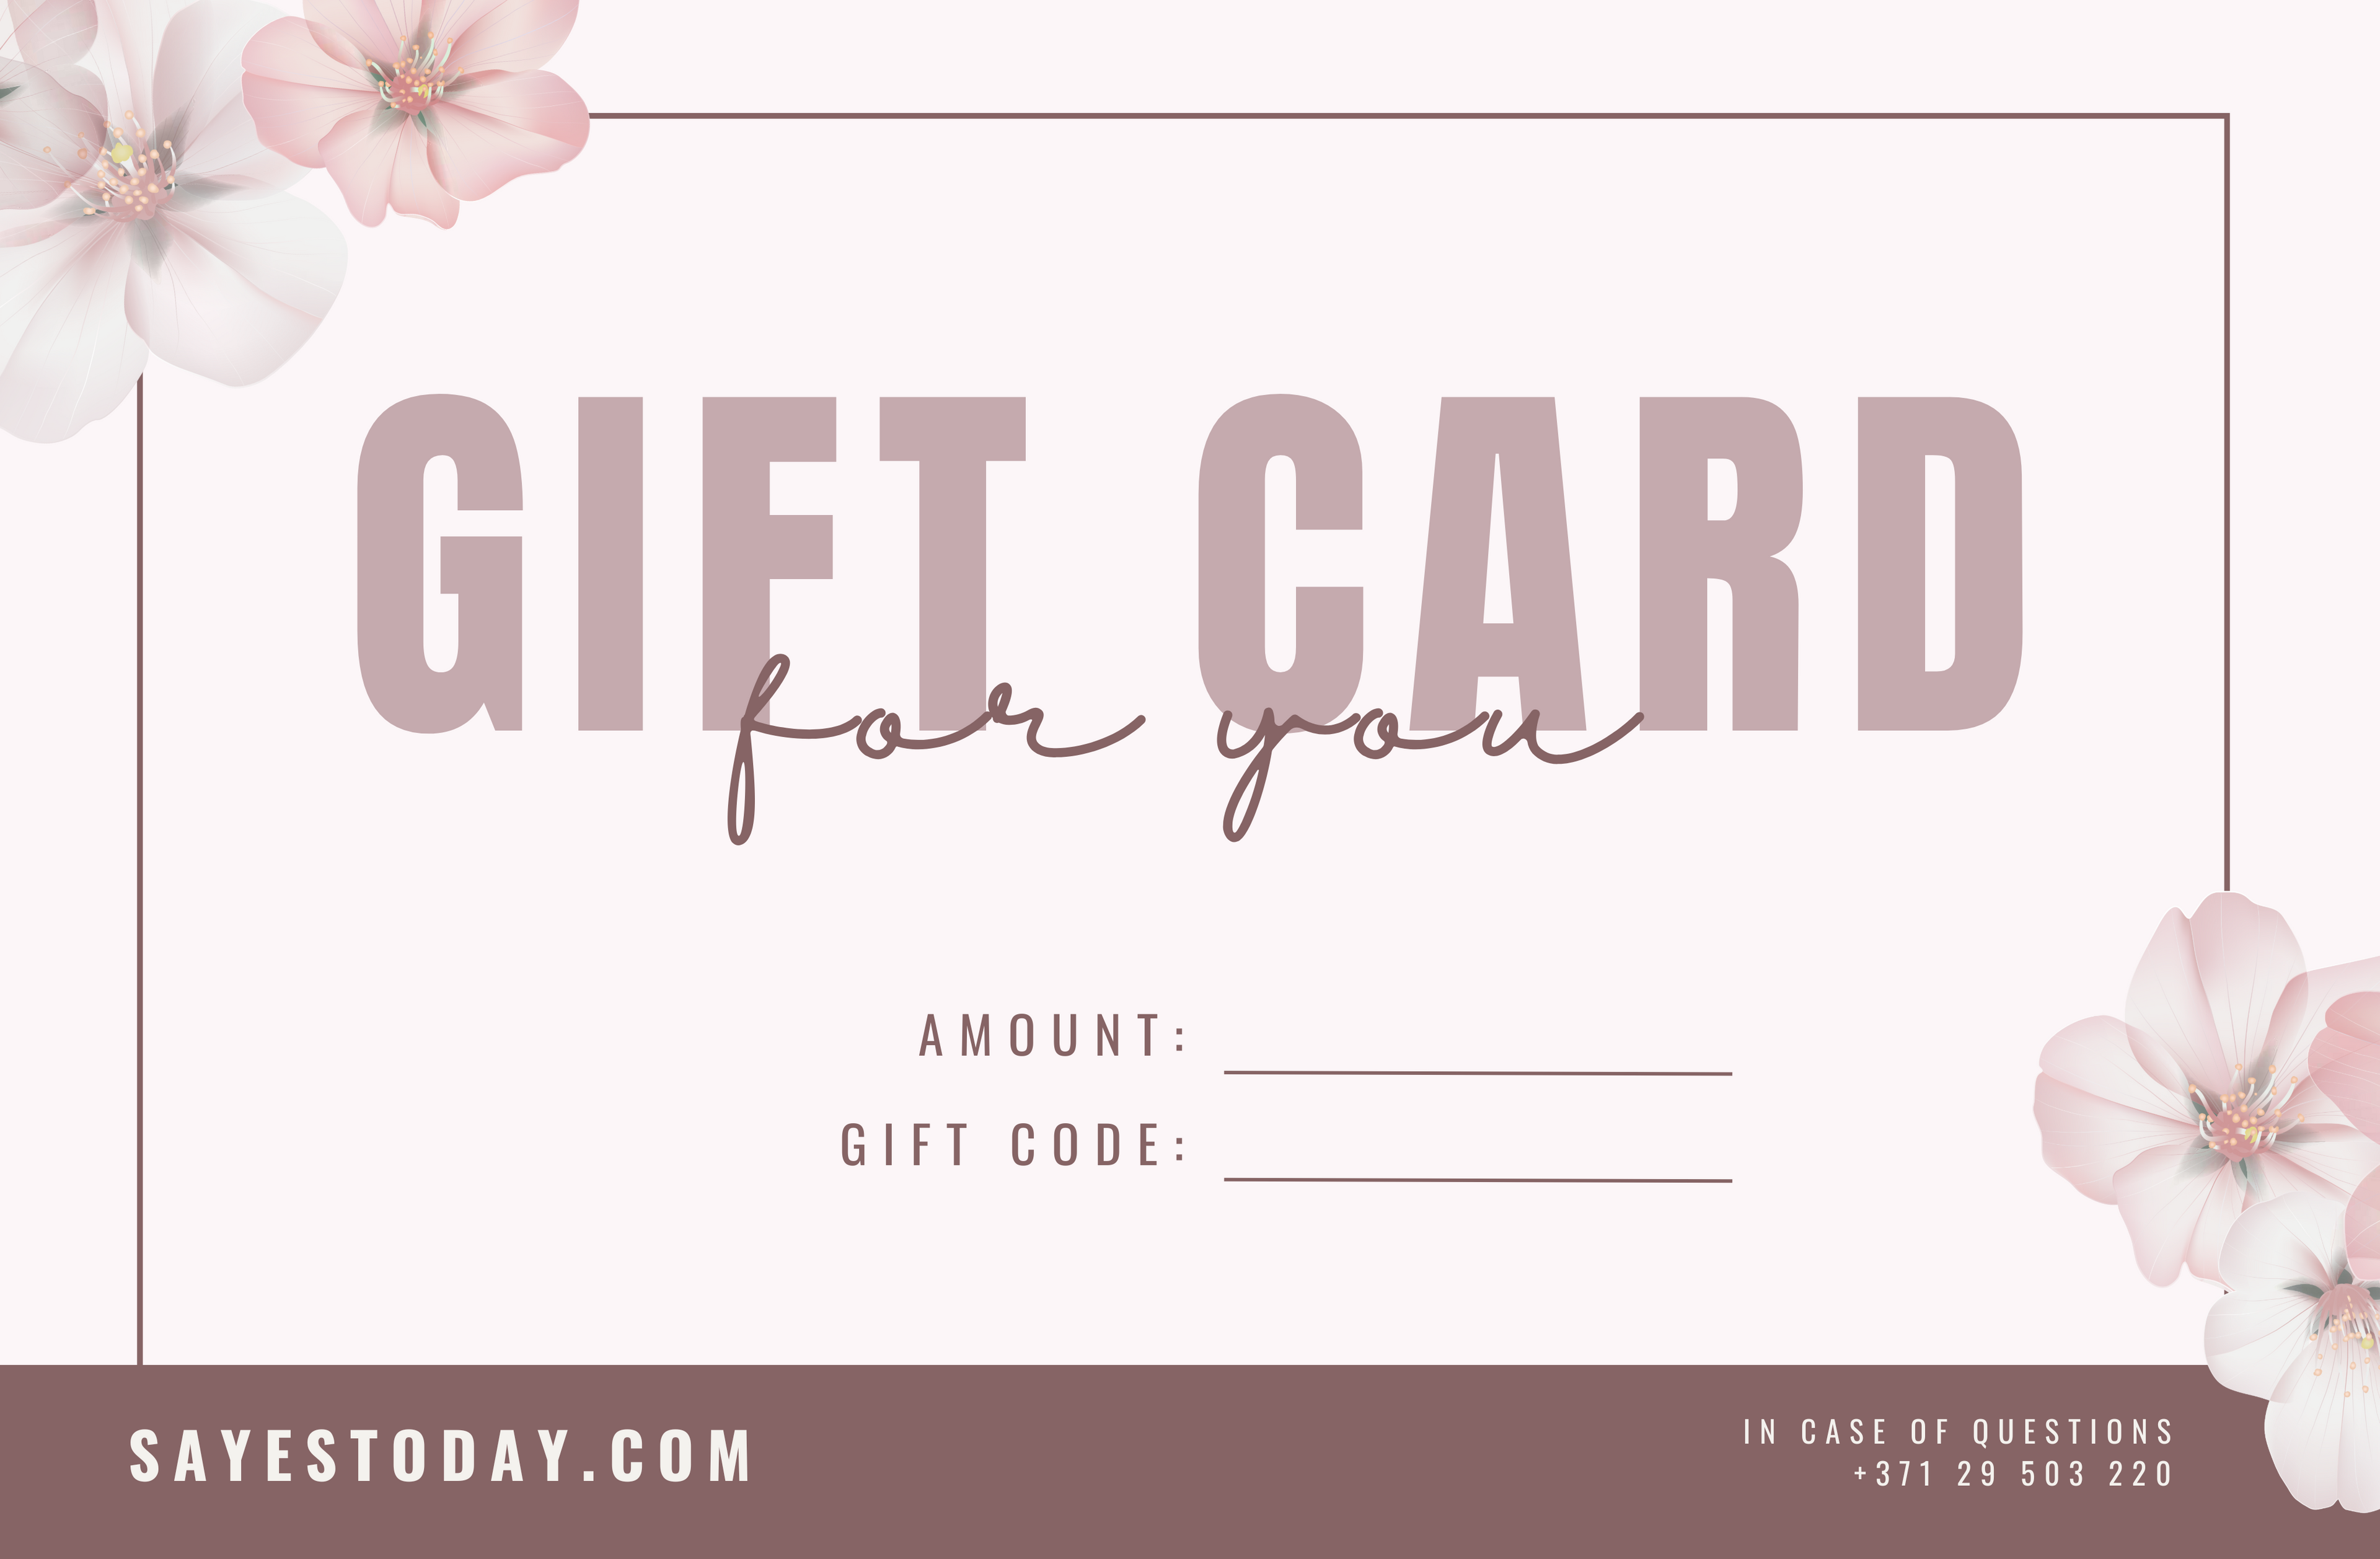 Sayes Today Physical Gift Card